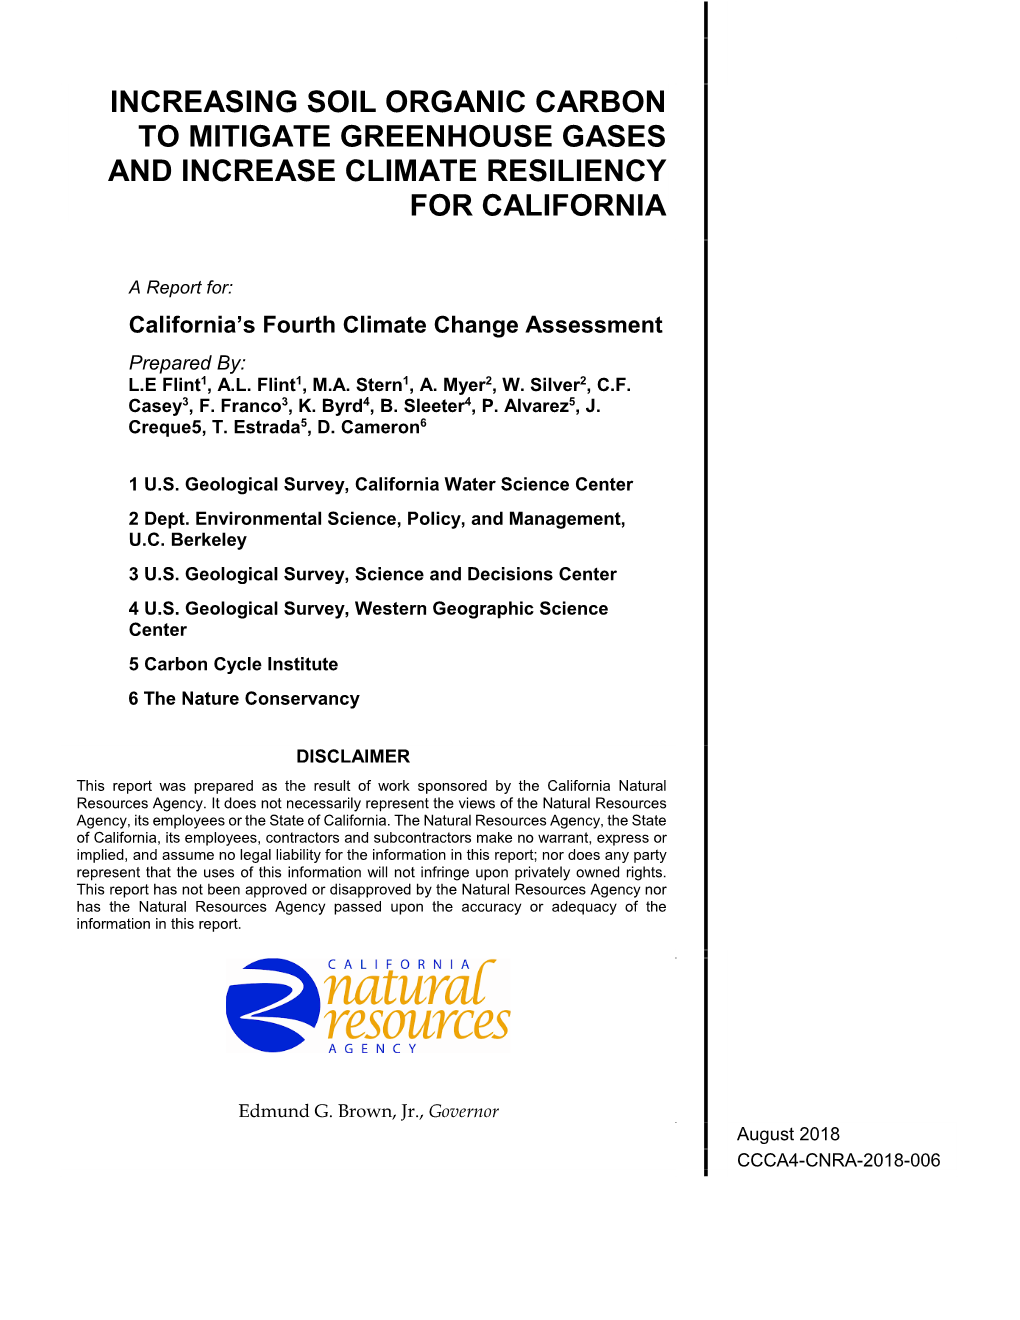 Increasing Soil Organic Carbon to Mitigate Greenhouse Gases and Increase Climate Resiliency for California